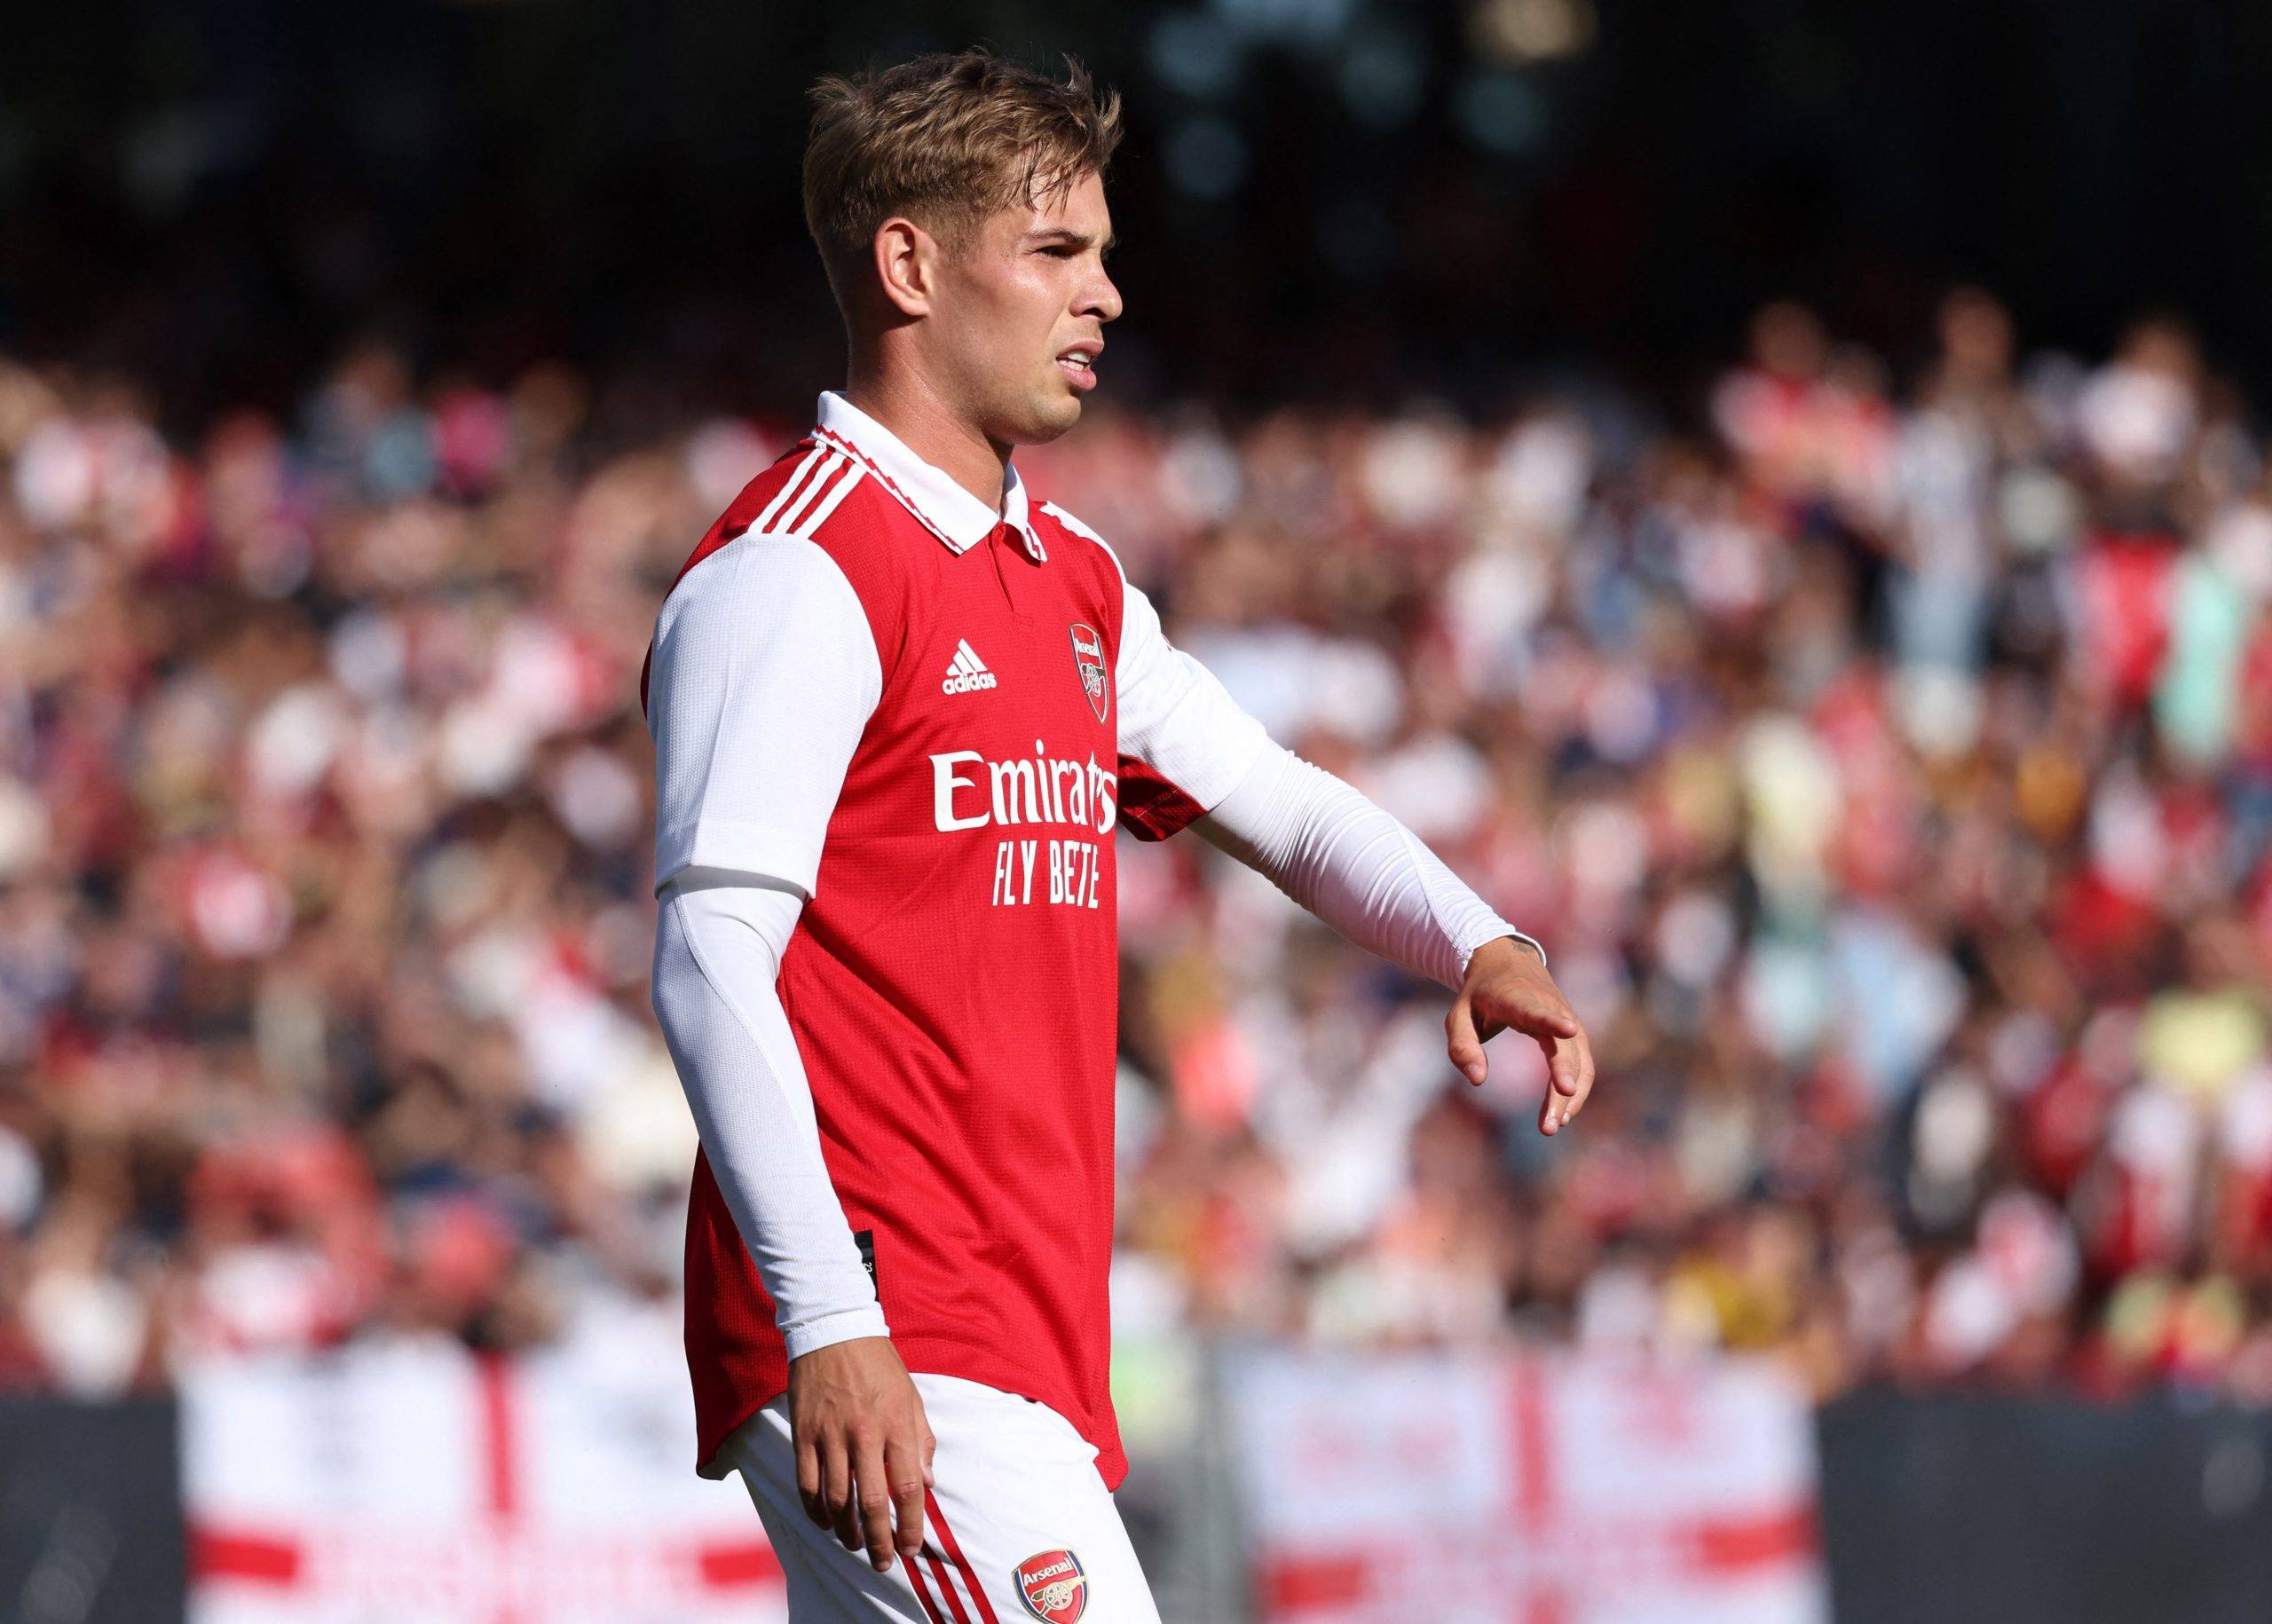 Arsenal: Emile Smith Rowe and Reiss Nelson decision to be made - Arsenal News